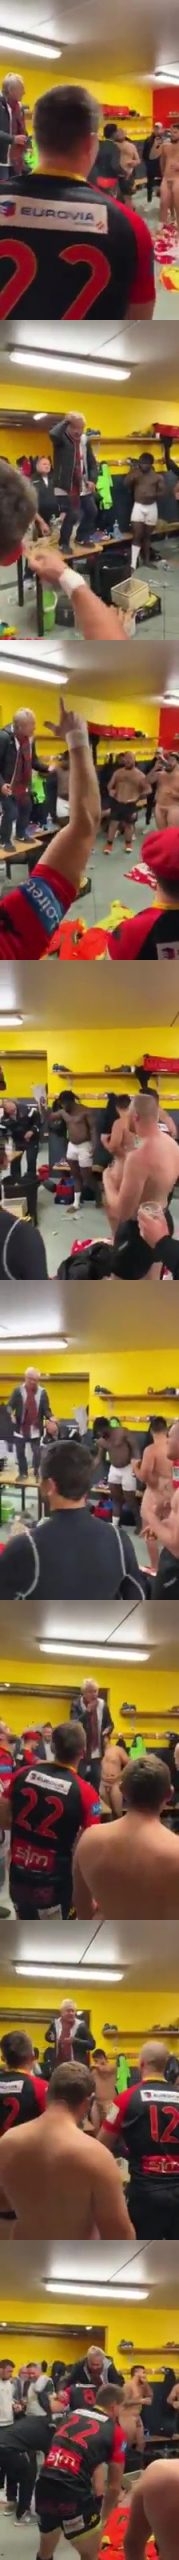 rugby players orleans caught naked locker room